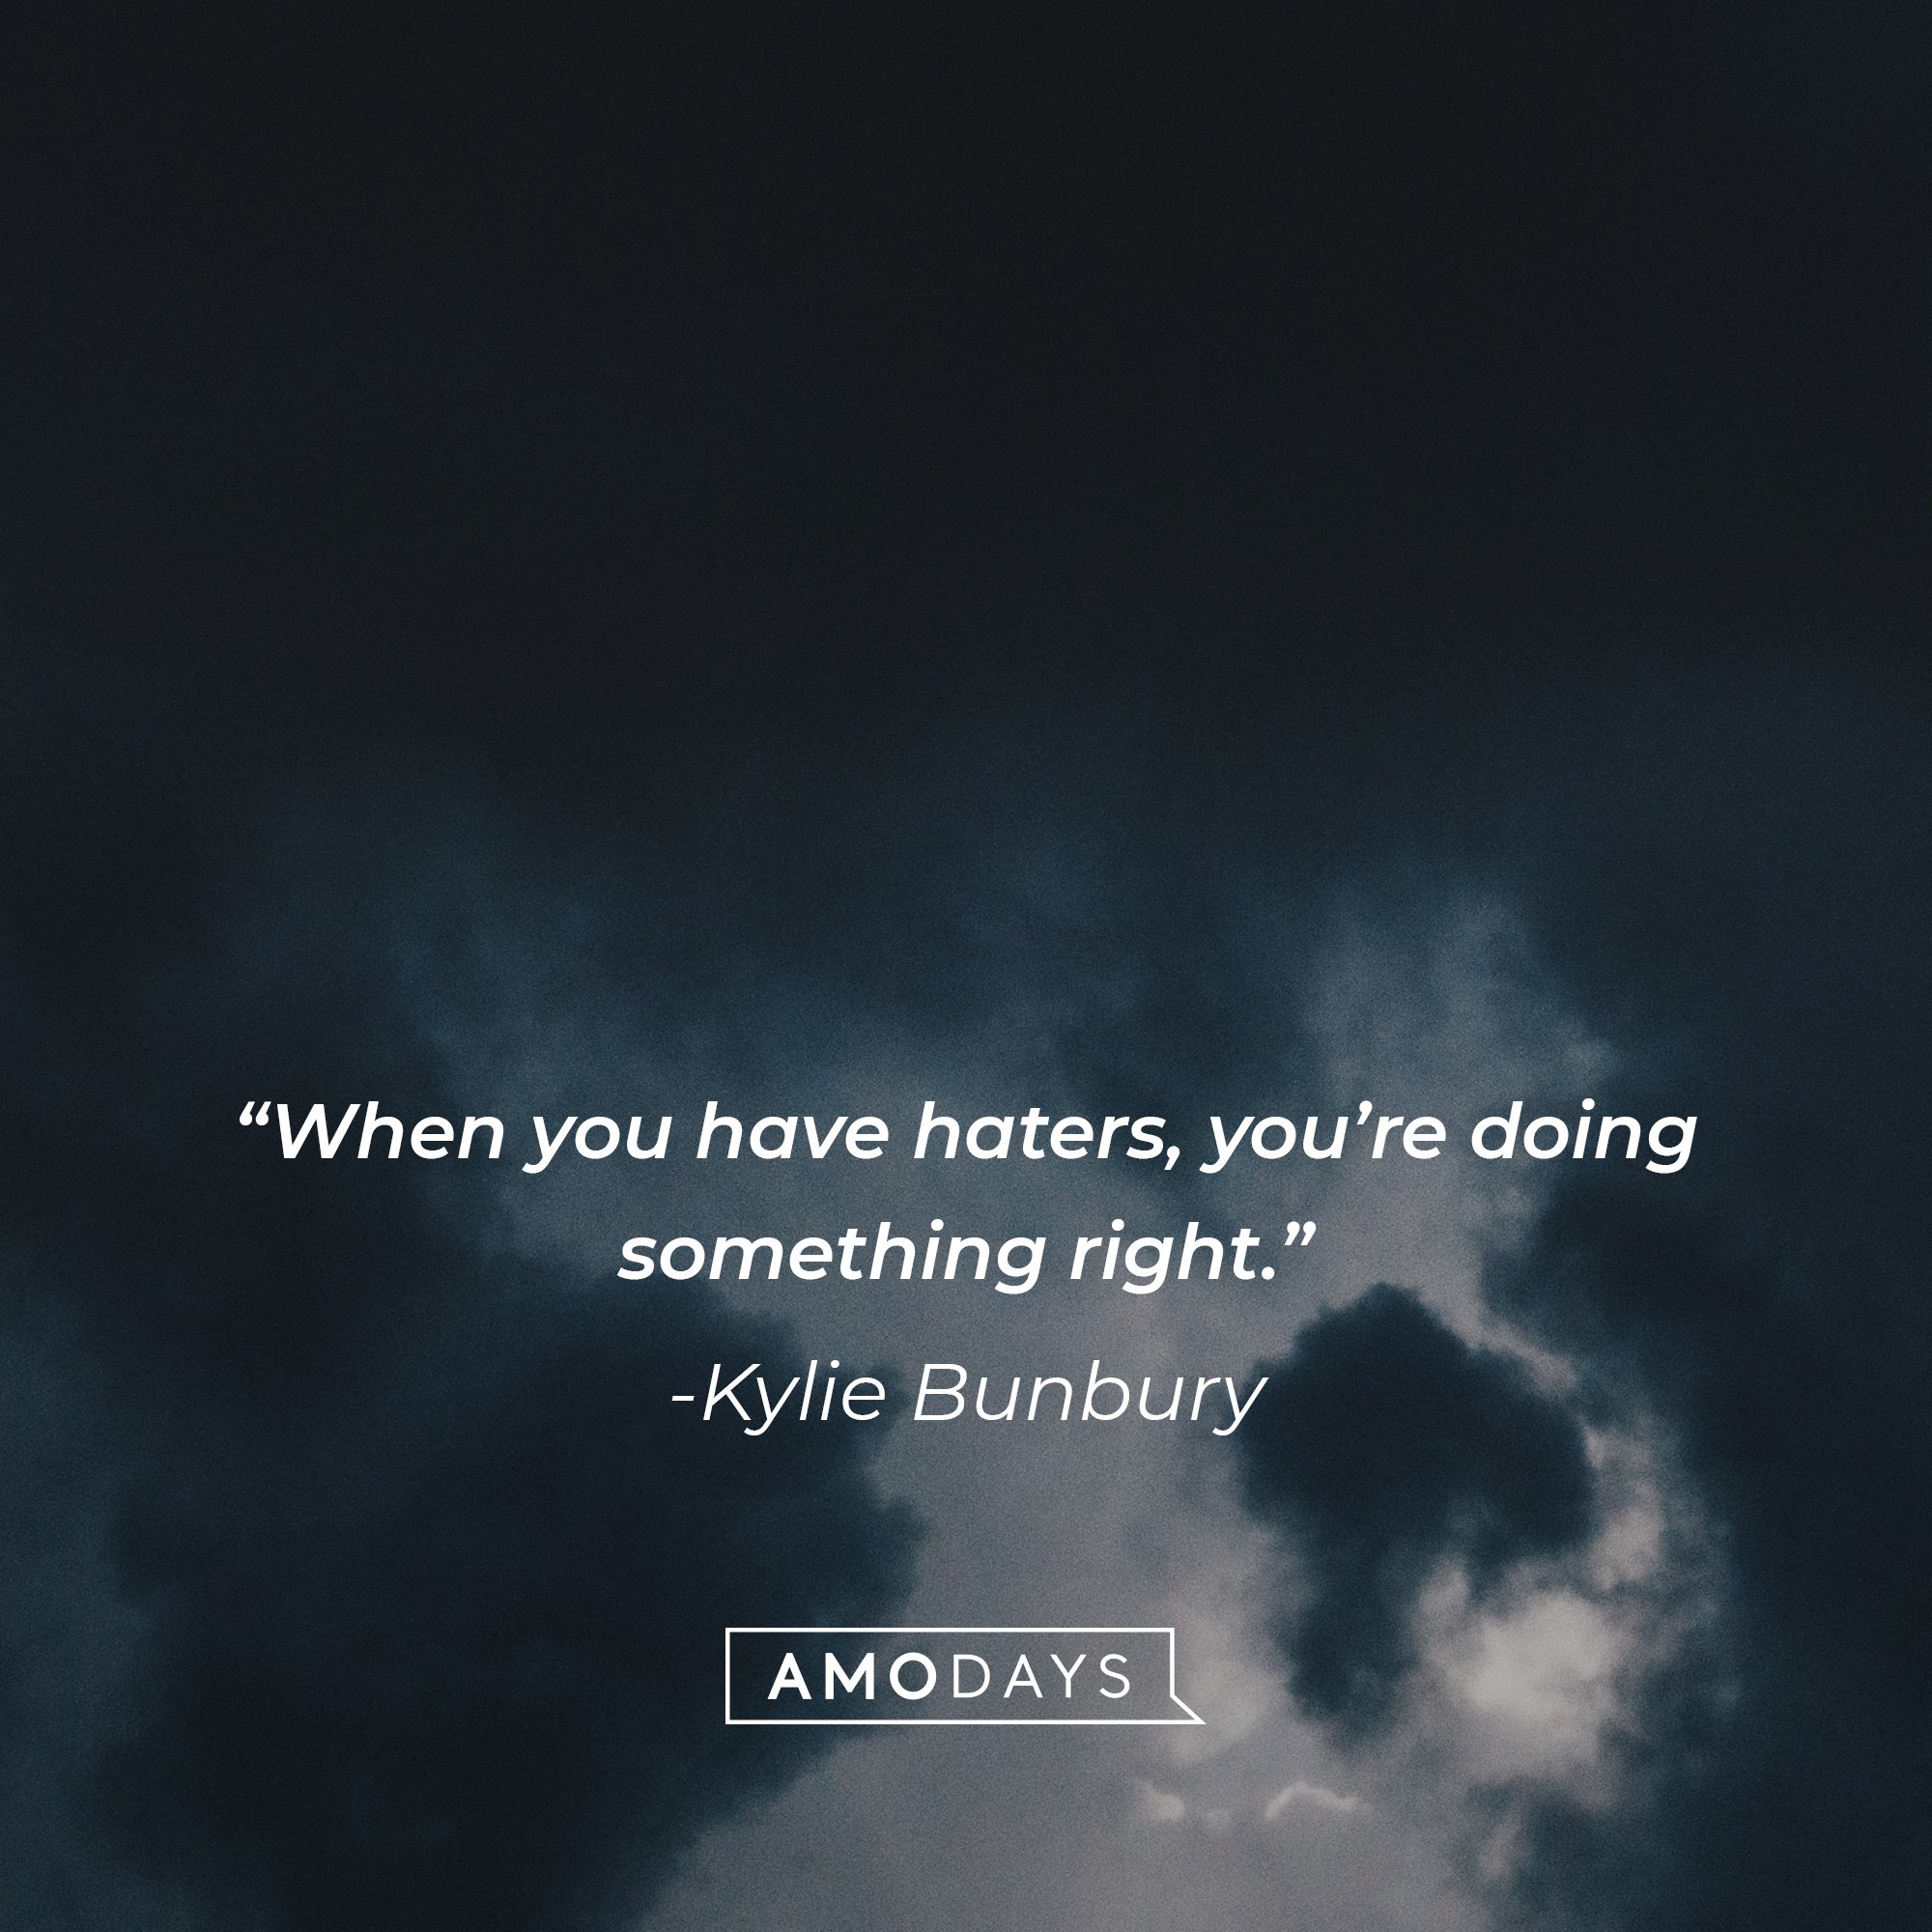 Kylie Bunbury’s quote: “When you have haters, you’re doing something right.” | Image: Amodays   